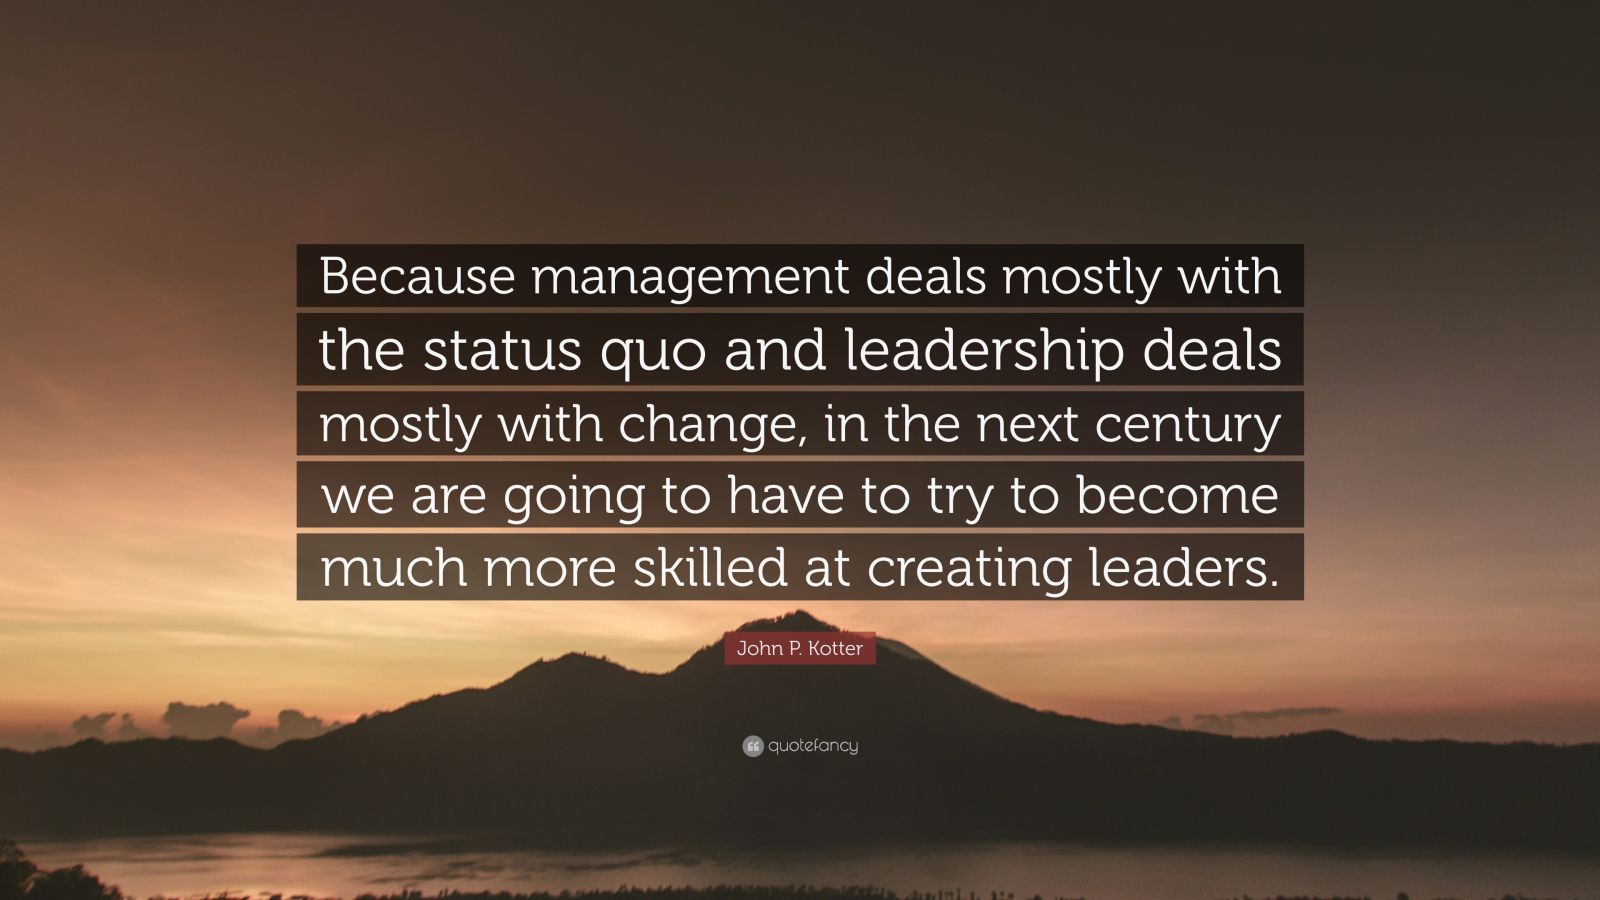 2148810 John P Kotter Quote Because management deals mostly with the